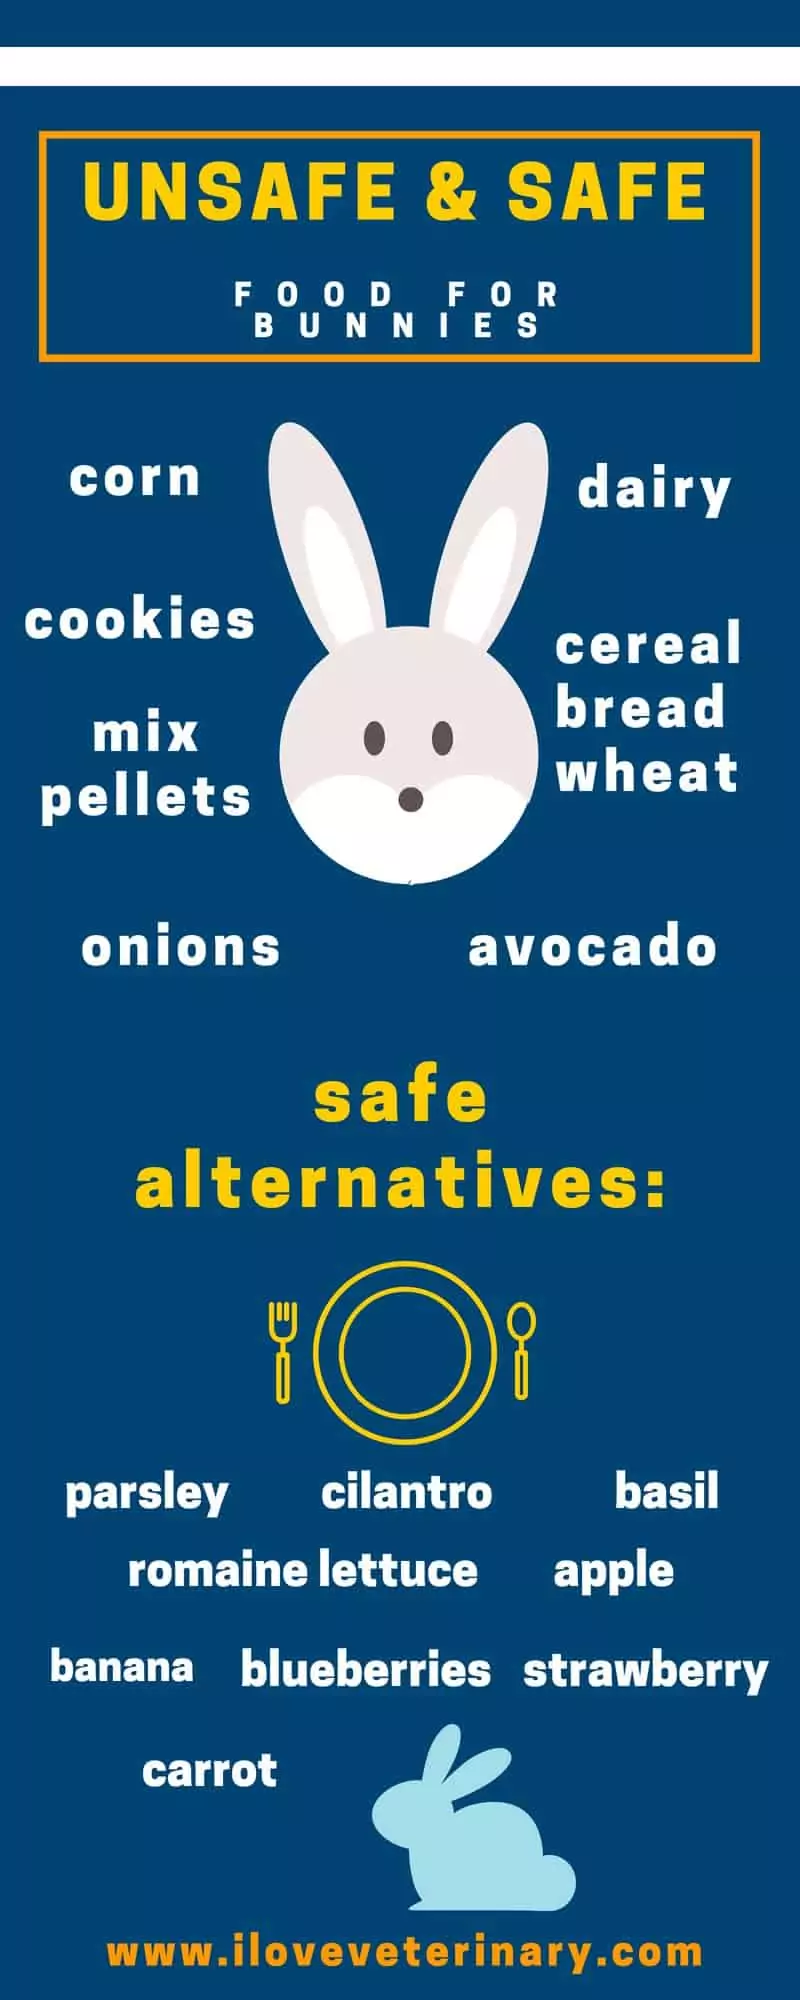 unsafe & safe food for bunnies infographic 